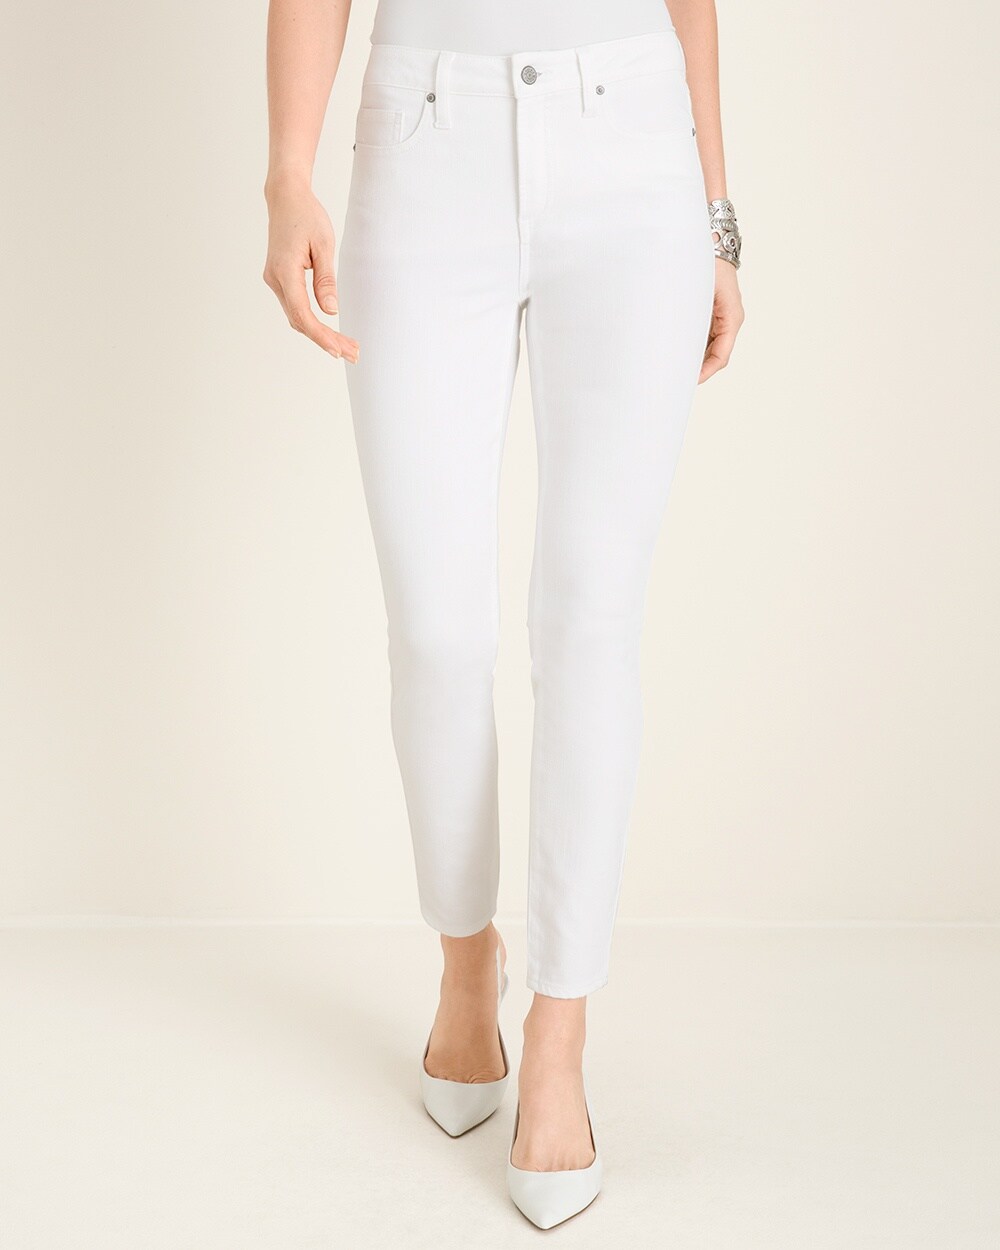 No-Stain White High-Rise Skinny Ankle Jeans